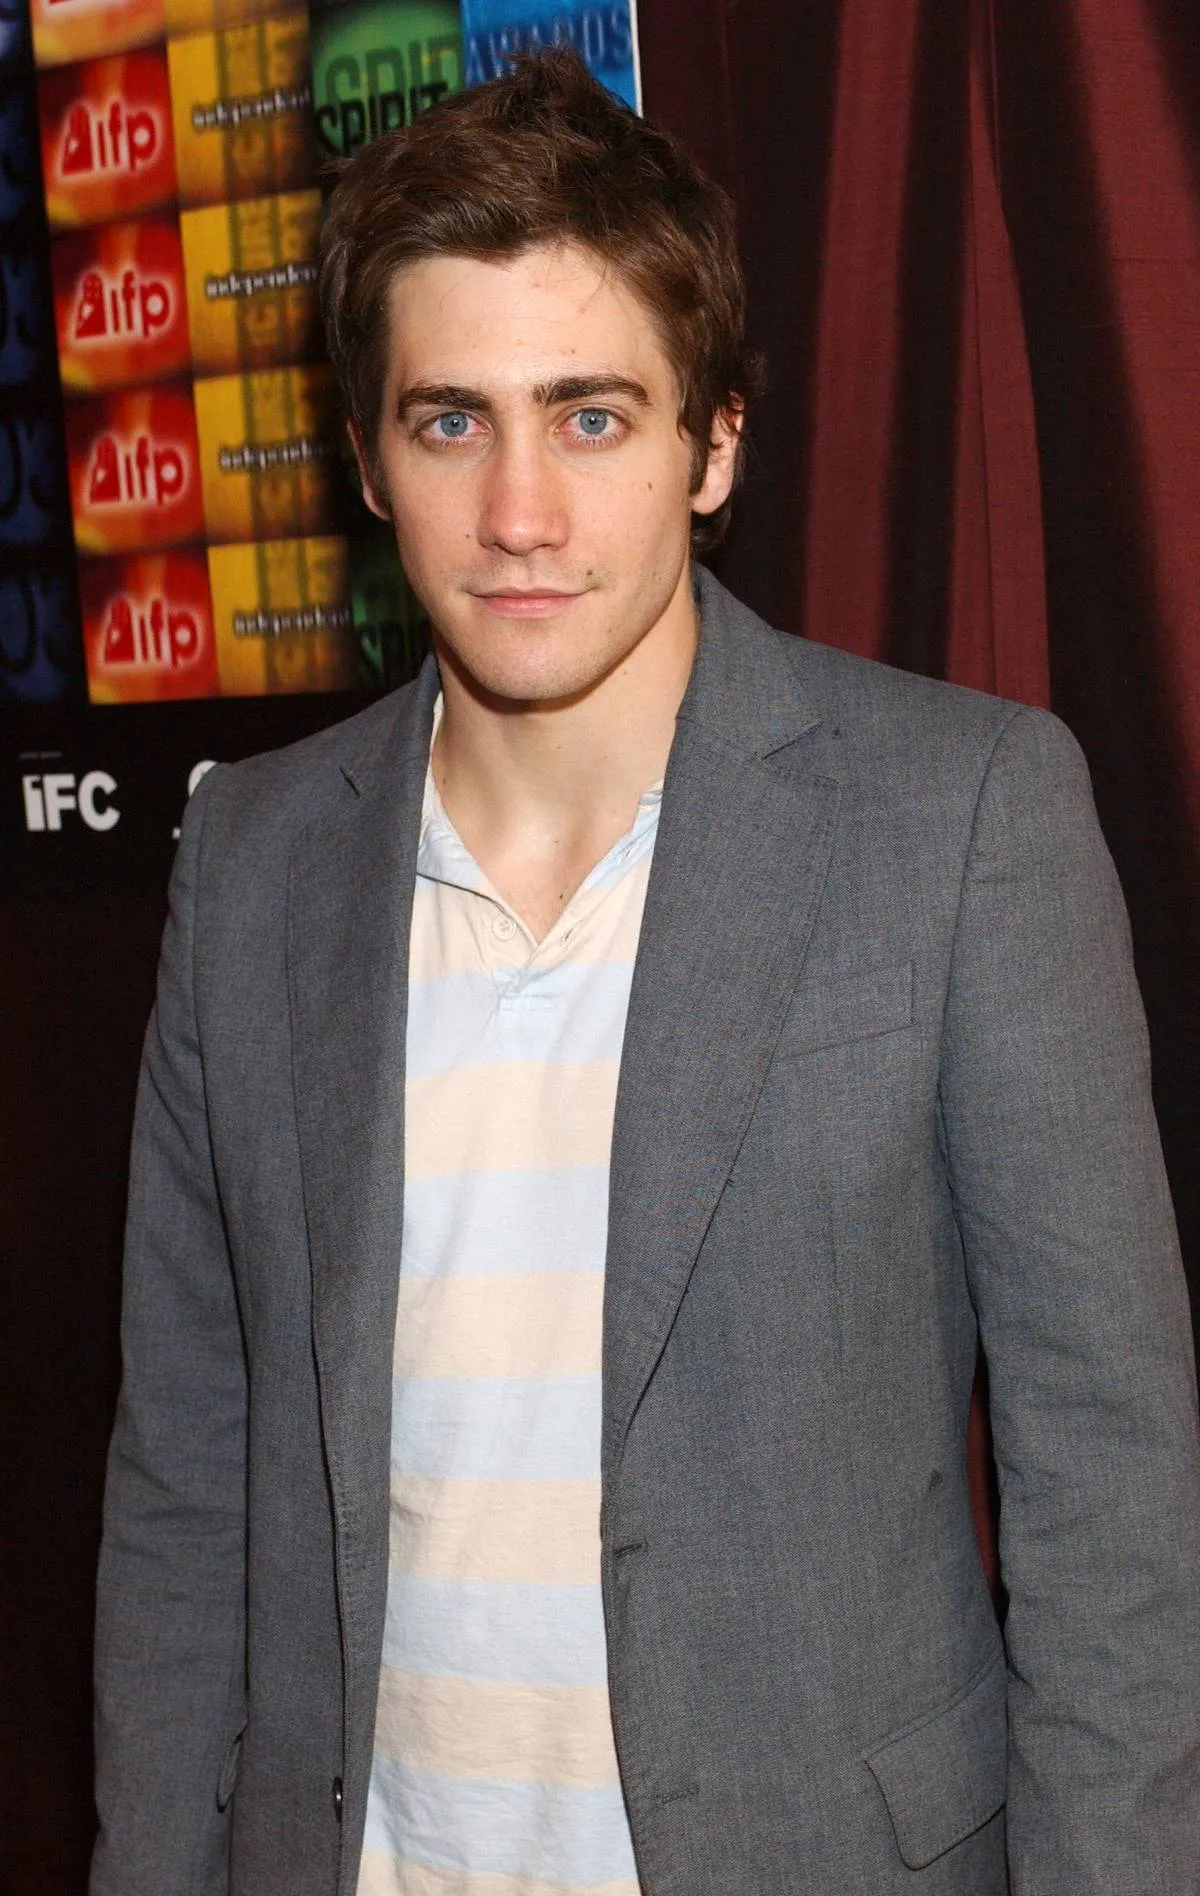 Jake Gyllenhaal Was A Low-Budget Spider-Man 3 Replacement